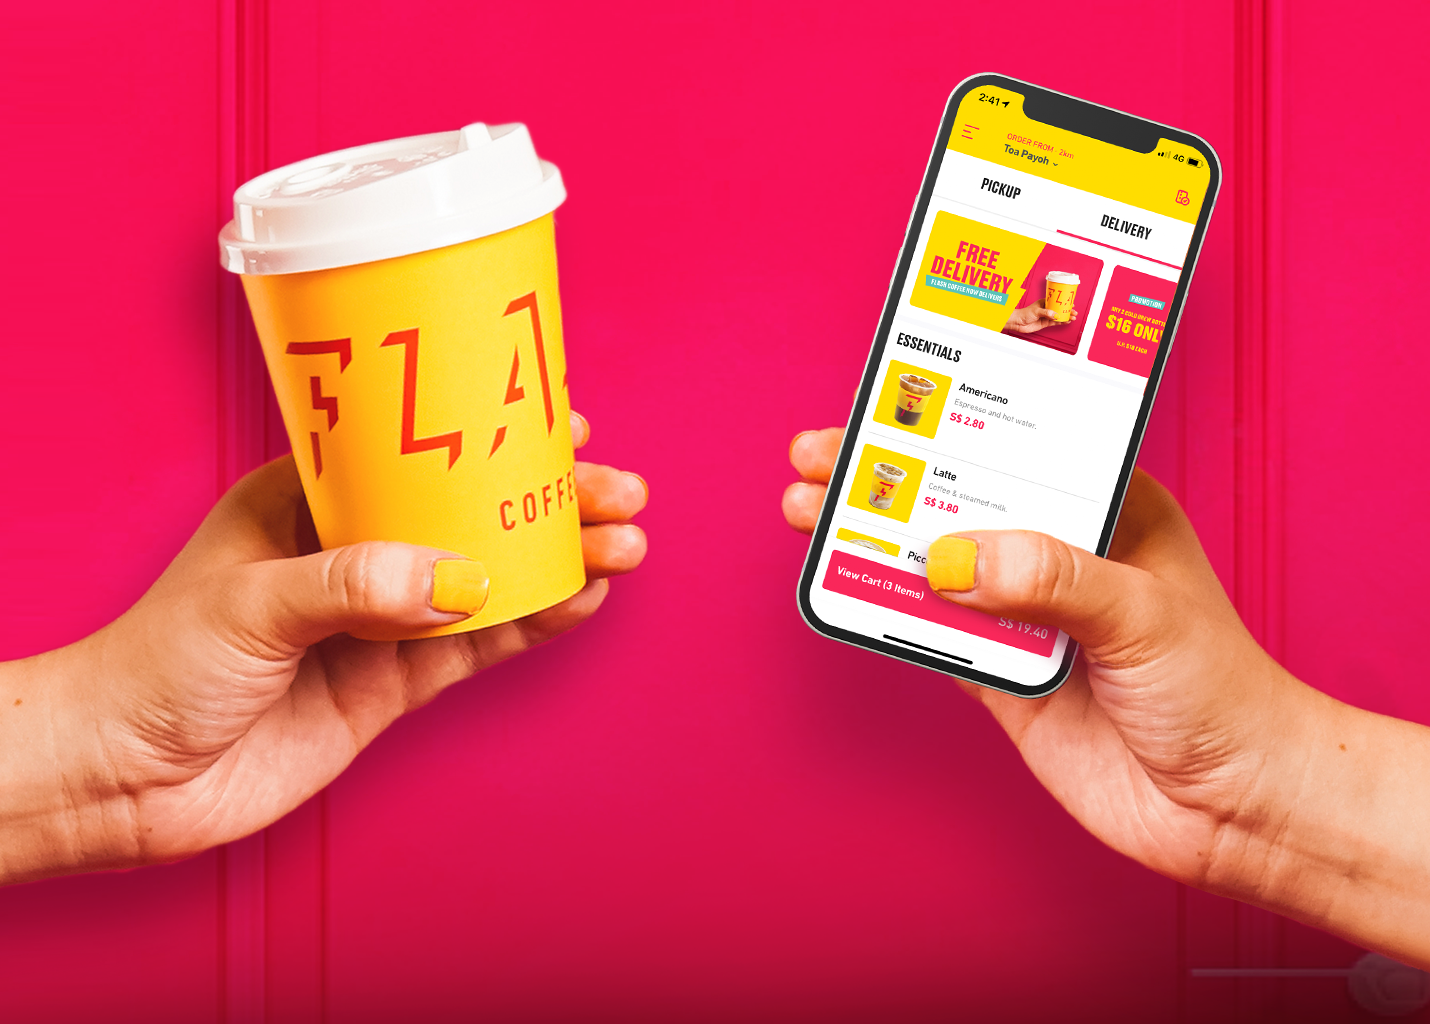 Get your daily caffeine fix in a jiffy with Flash Coffee’s new In-app Delivery Offer! - Alvinology